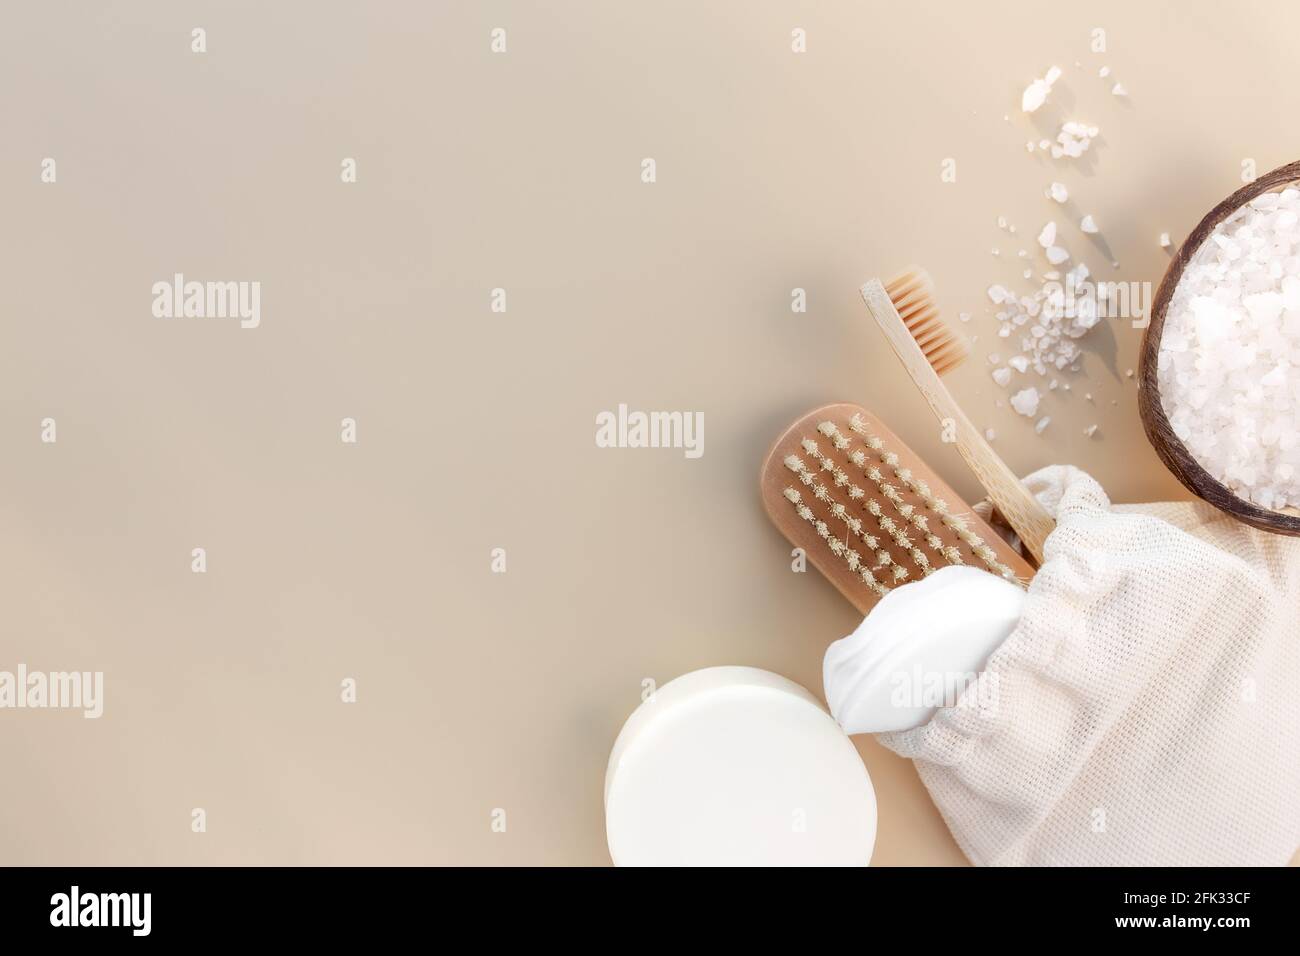 Bath accessories flat lay on beige background. Natural body care components. Healthcare concept, wooden tooth brush, foot brush, cotton pads, soap. Ec Stock Photo